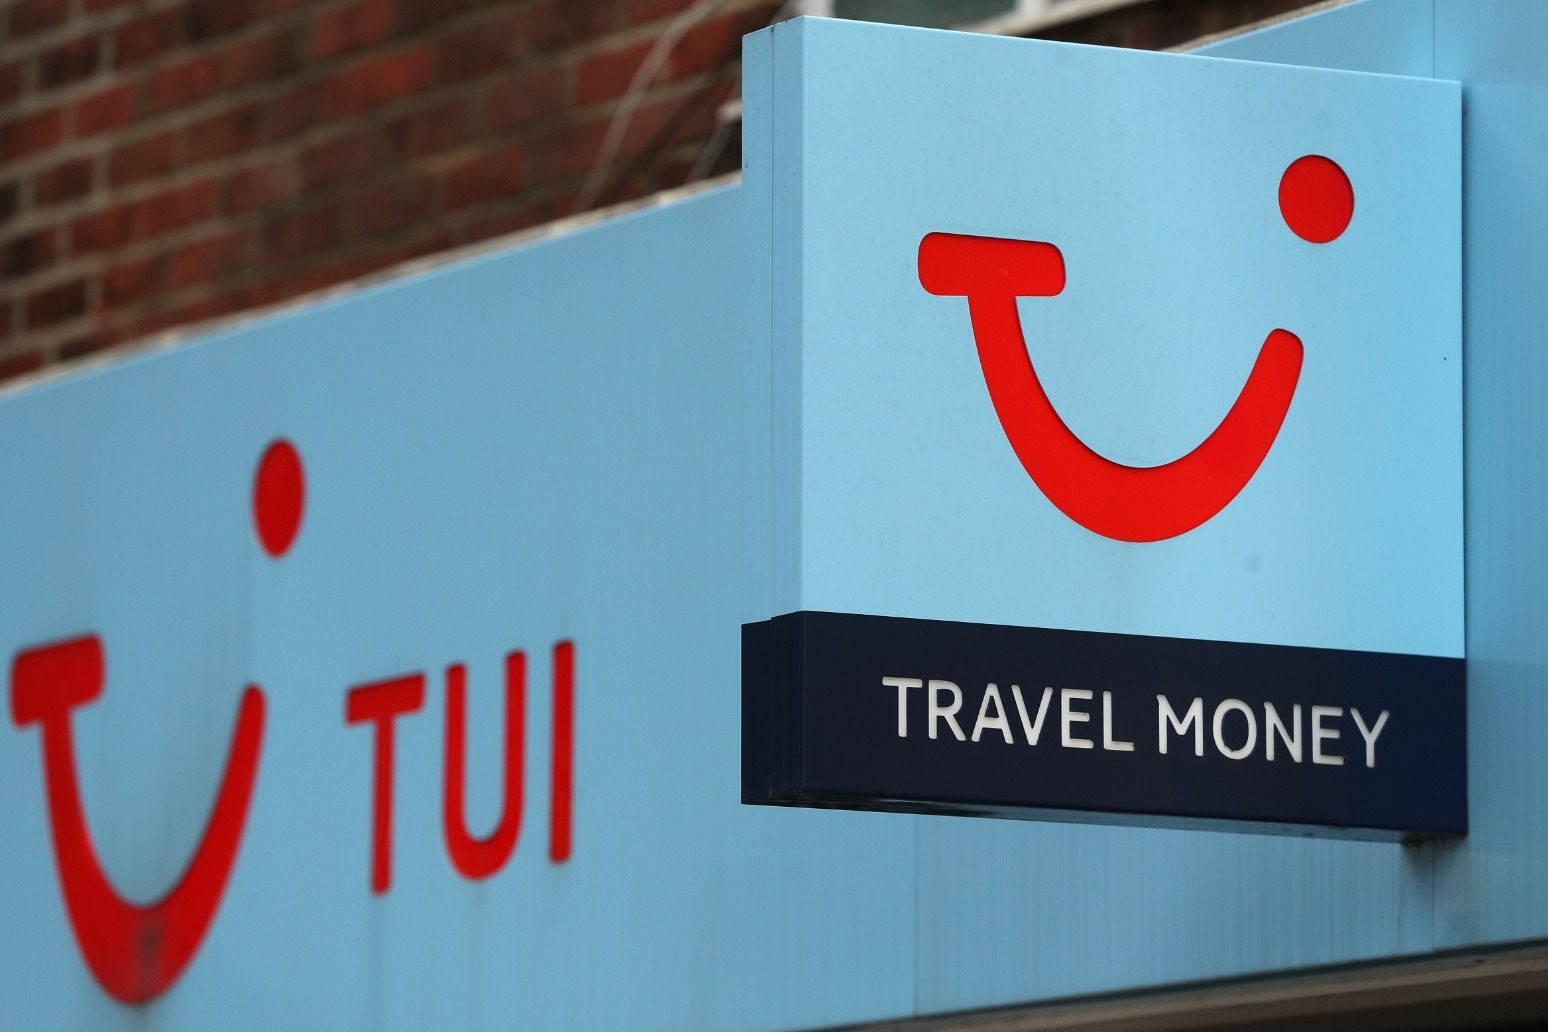 Tui reveals £63m hit from airport travel chaos 